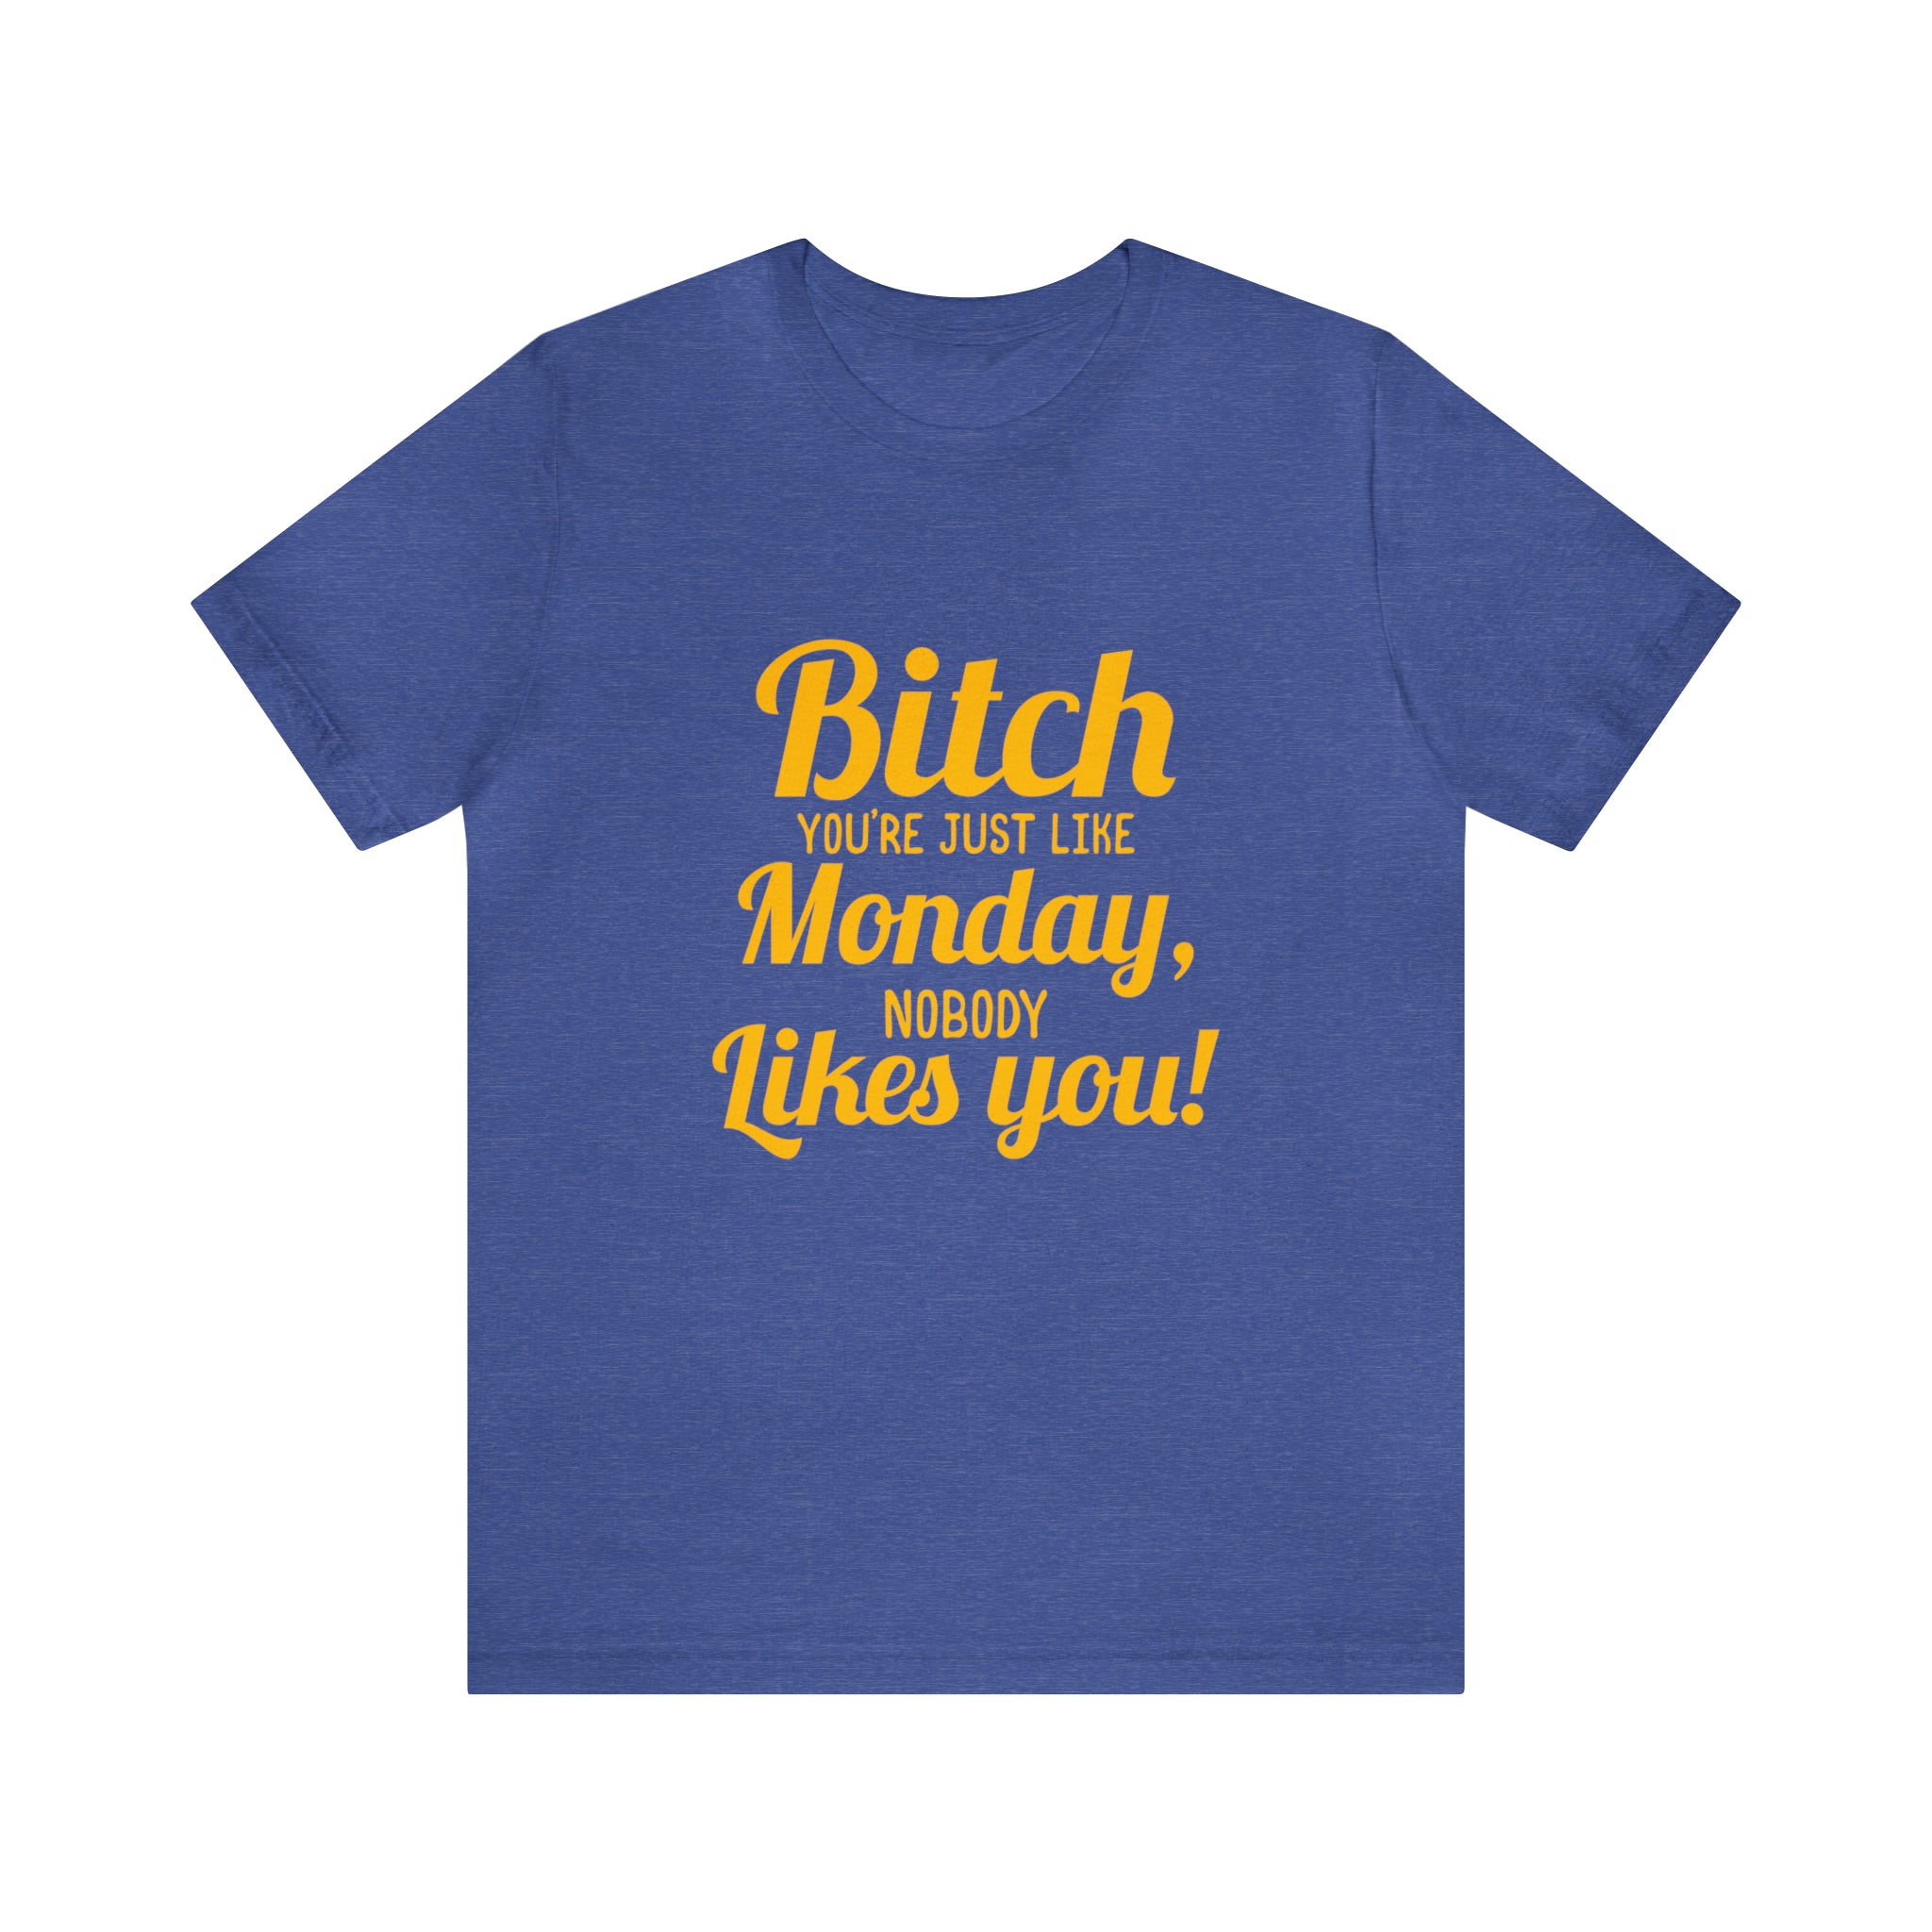 Updated Description: Bitch you are just like Monday nobody likes you T-shirt.